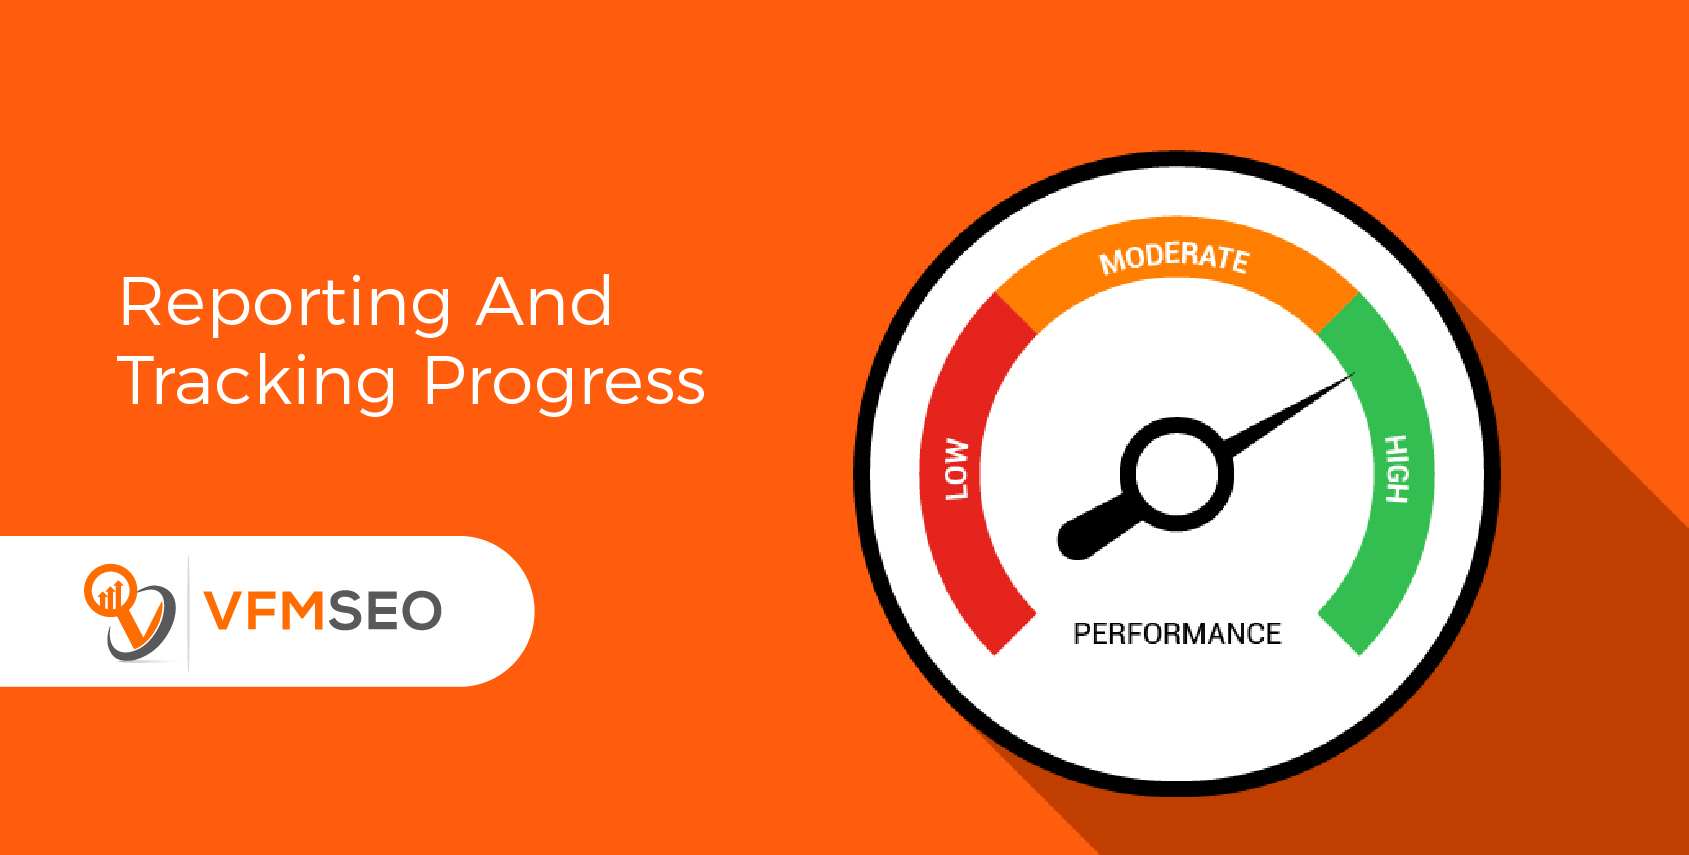 Reporting And Tracking Progress